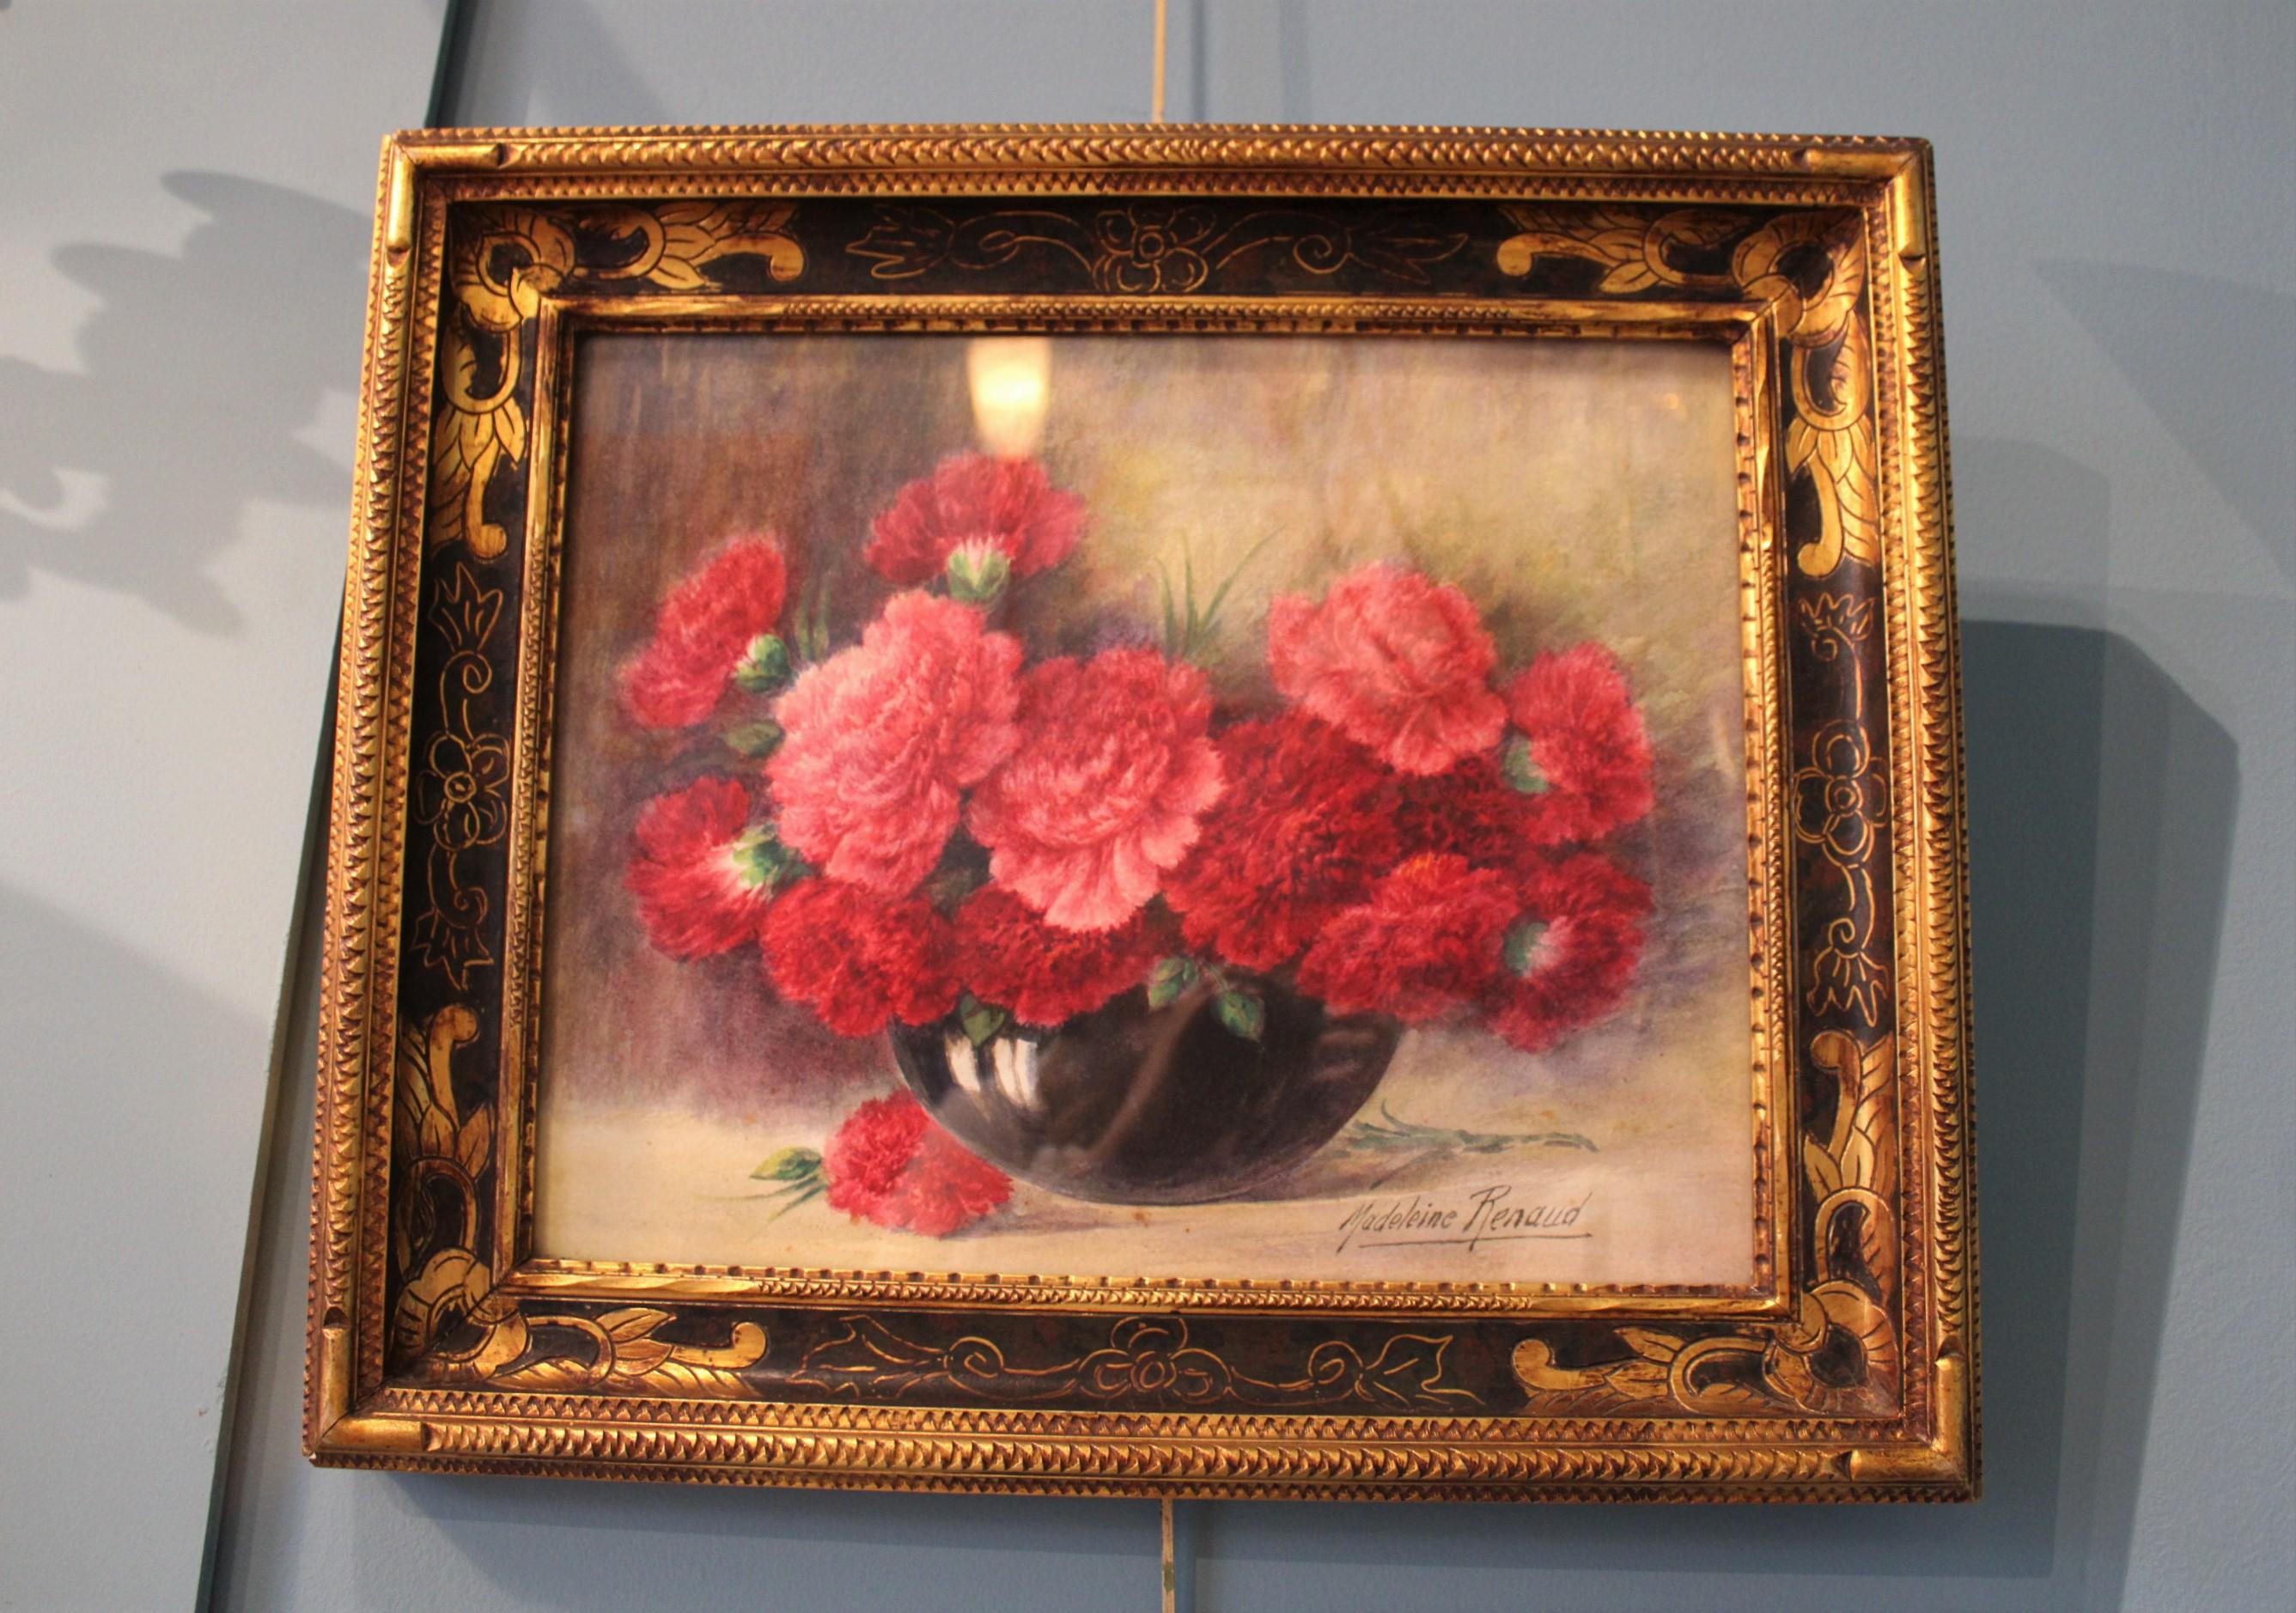 Madeleine Renaud (1900 - 1994)
Vase with a bouquet of flowers.
Watercolor on paper, framed under glass.
France, 20th century.

Dimensions with frame : 52 x 44 x 4.5 cm.
Dimensions without frame : 40 x 33 x 0.2 cm.